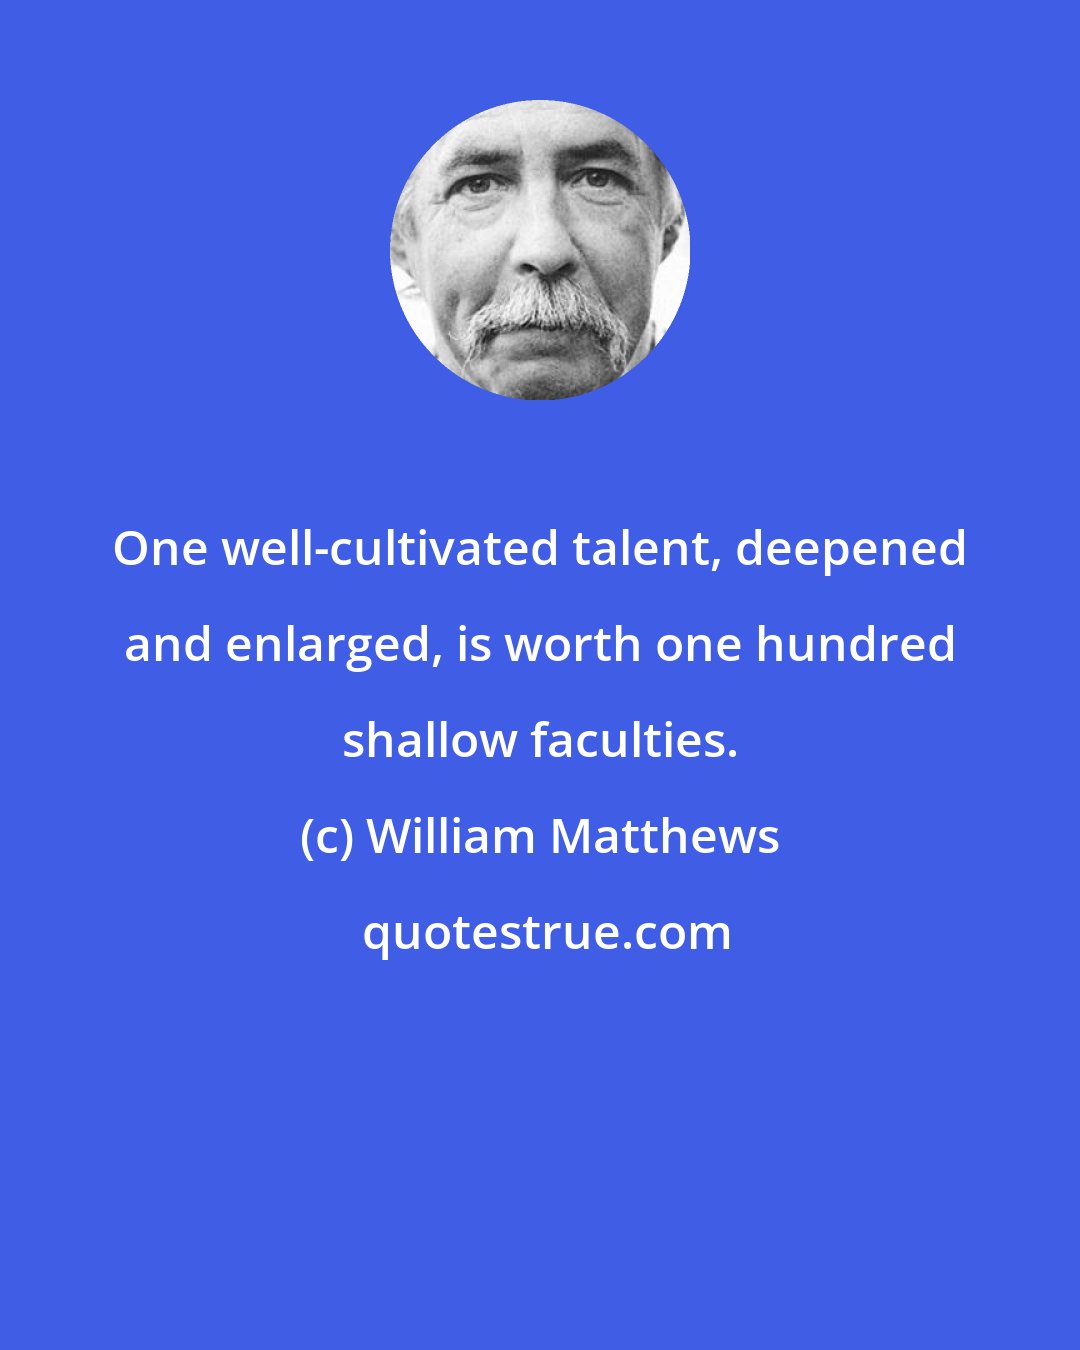 William Matthews: One well-cultivated talent, deepened and enlarged, is worth one hundred shallow faculties.